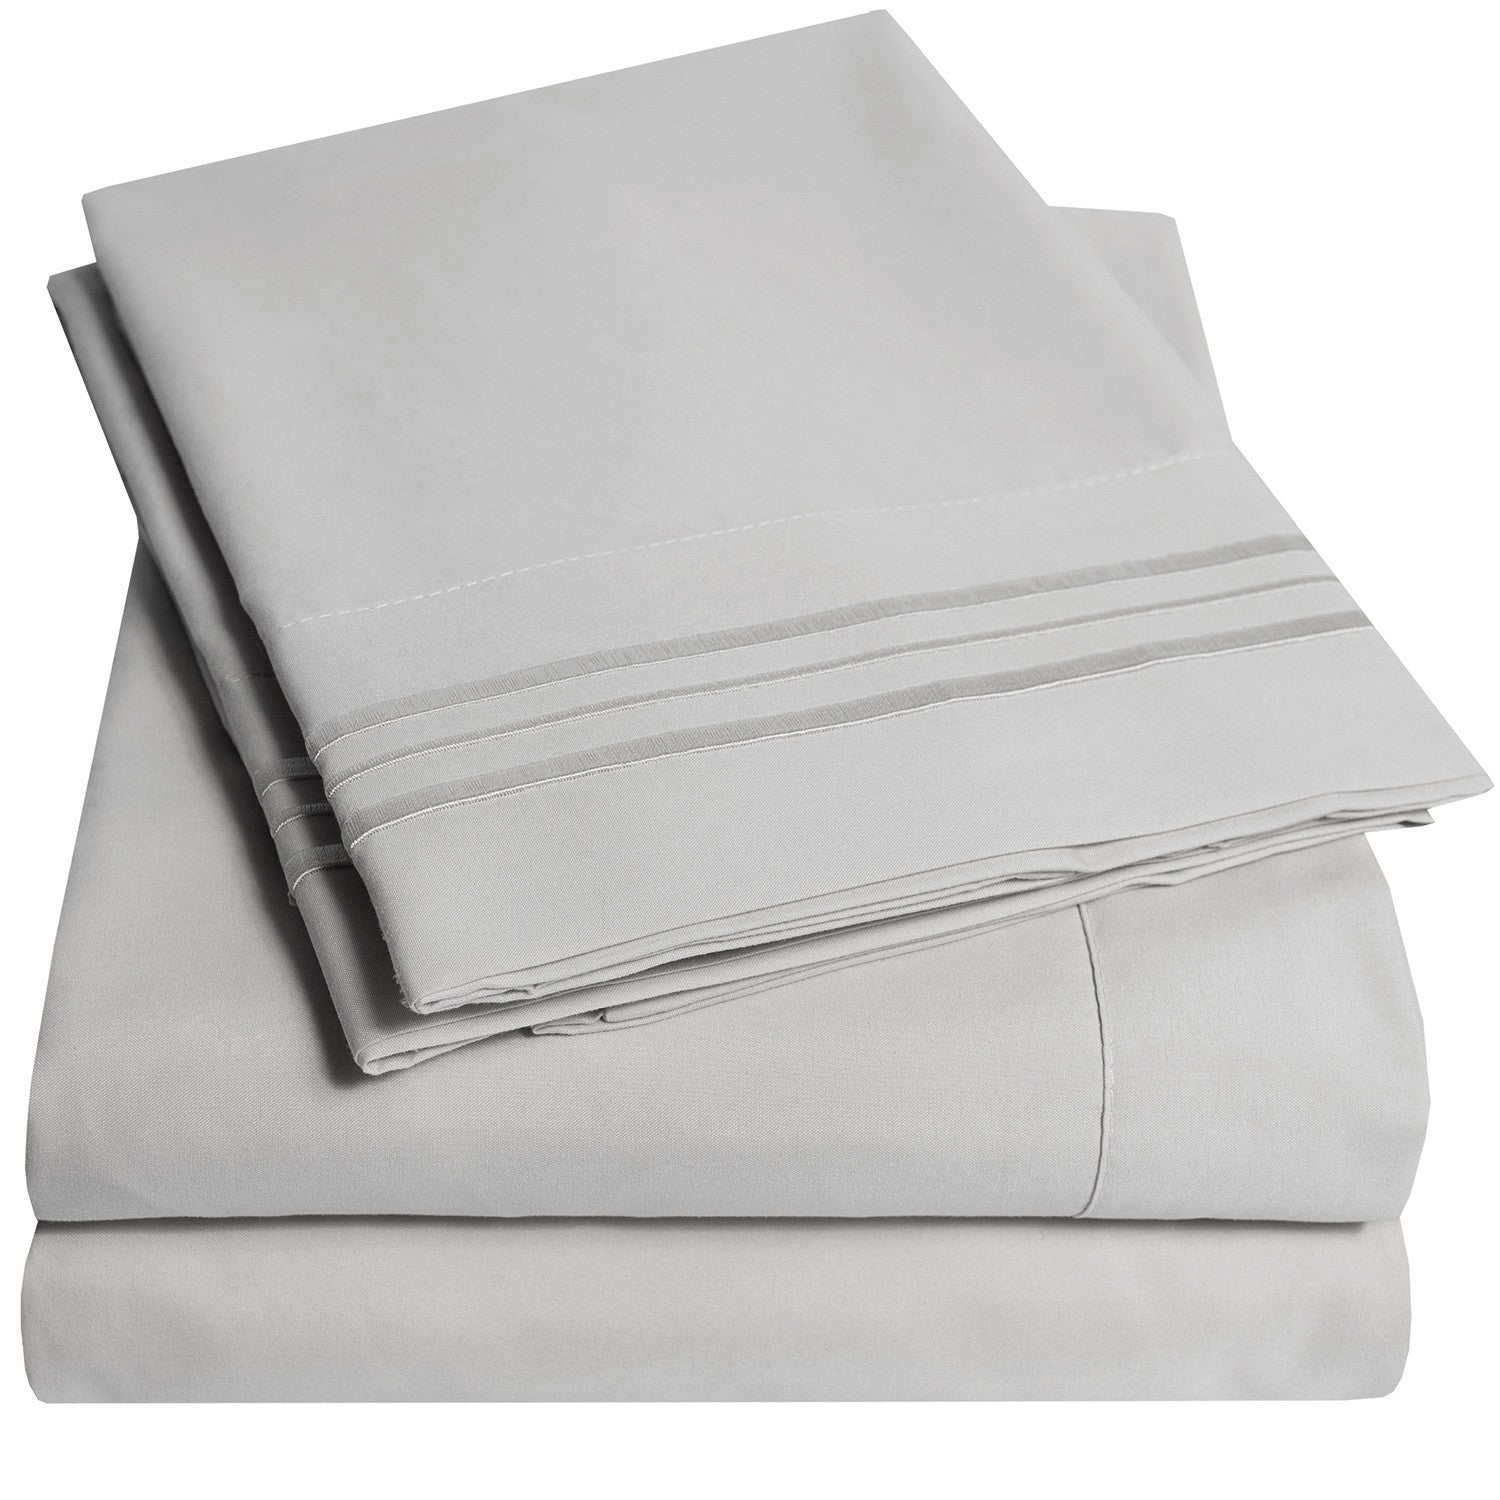 Classic 4-Piece Bed Sheet Set (Silver) - Folded